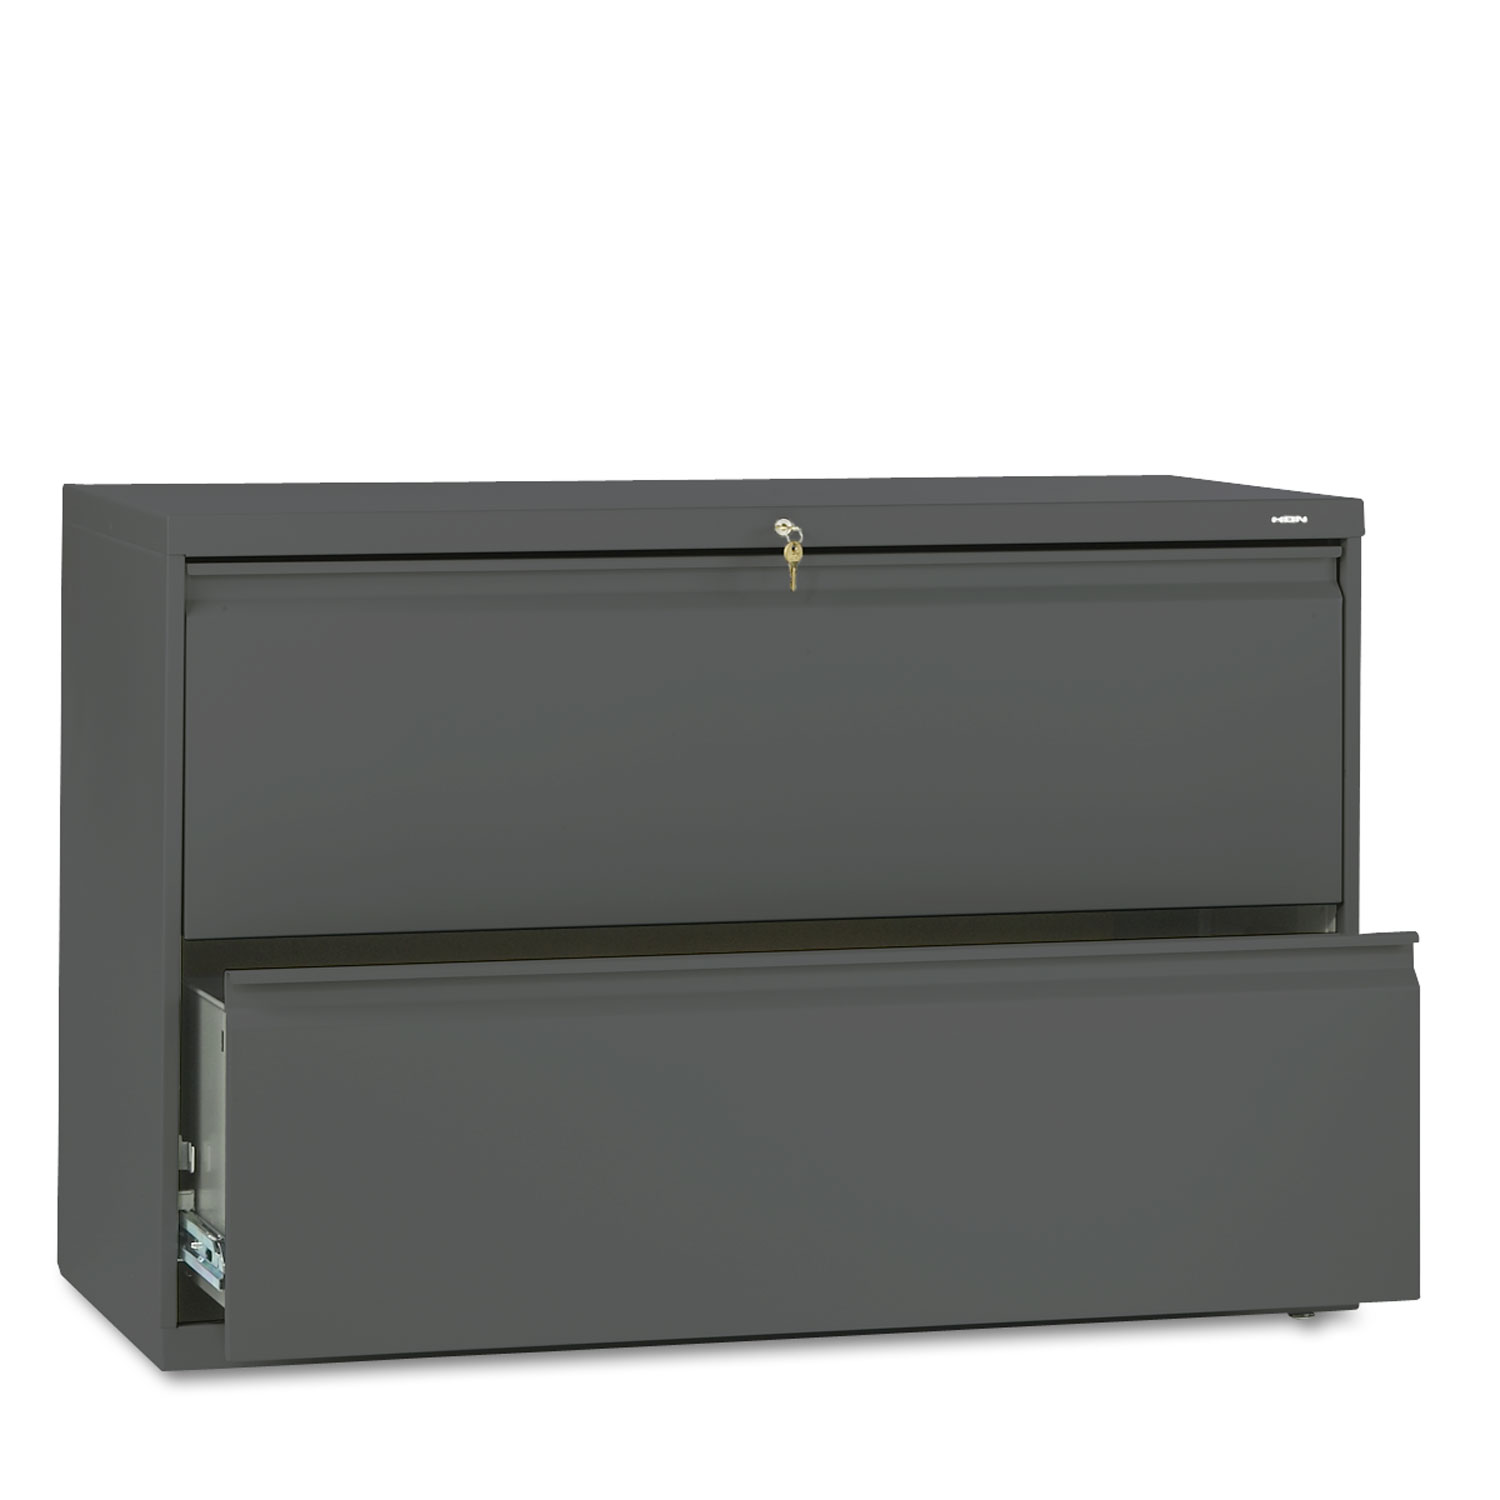  HON H892.L.S 800 Series Two-Drawer Lateral File, 42w x 19.25d x 28.38h, Charcoal (HON892LS) 